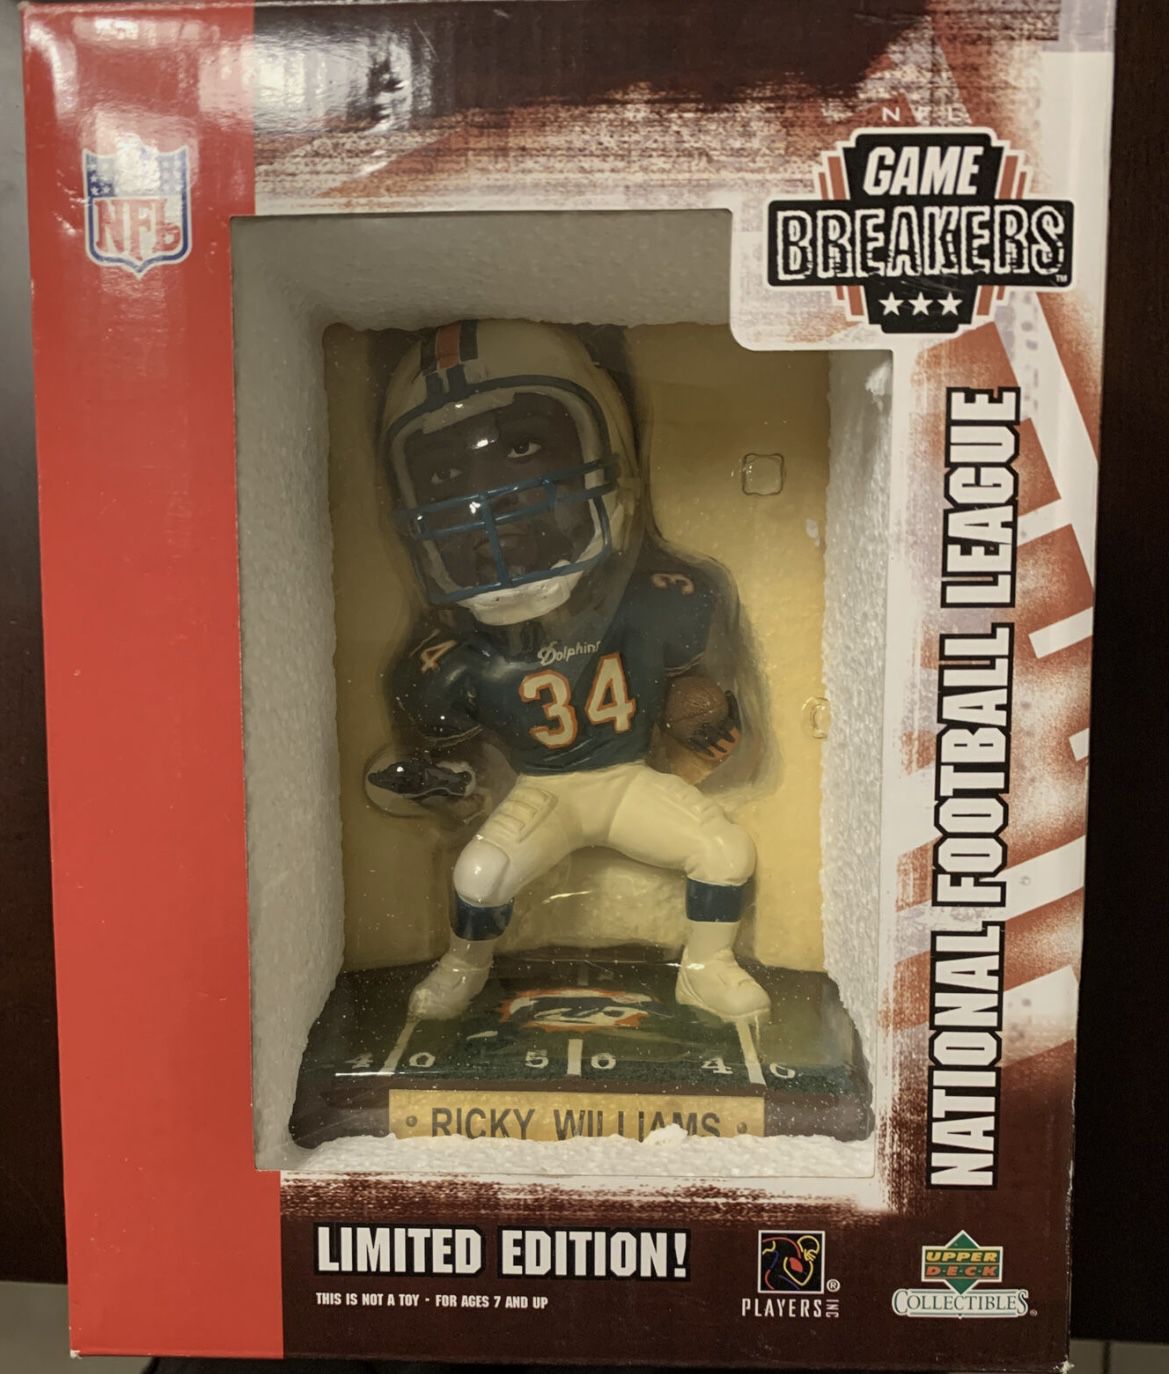 Game Breakers Upper Deck Ricky Williams #34 Miami Dolphins Figurine 98